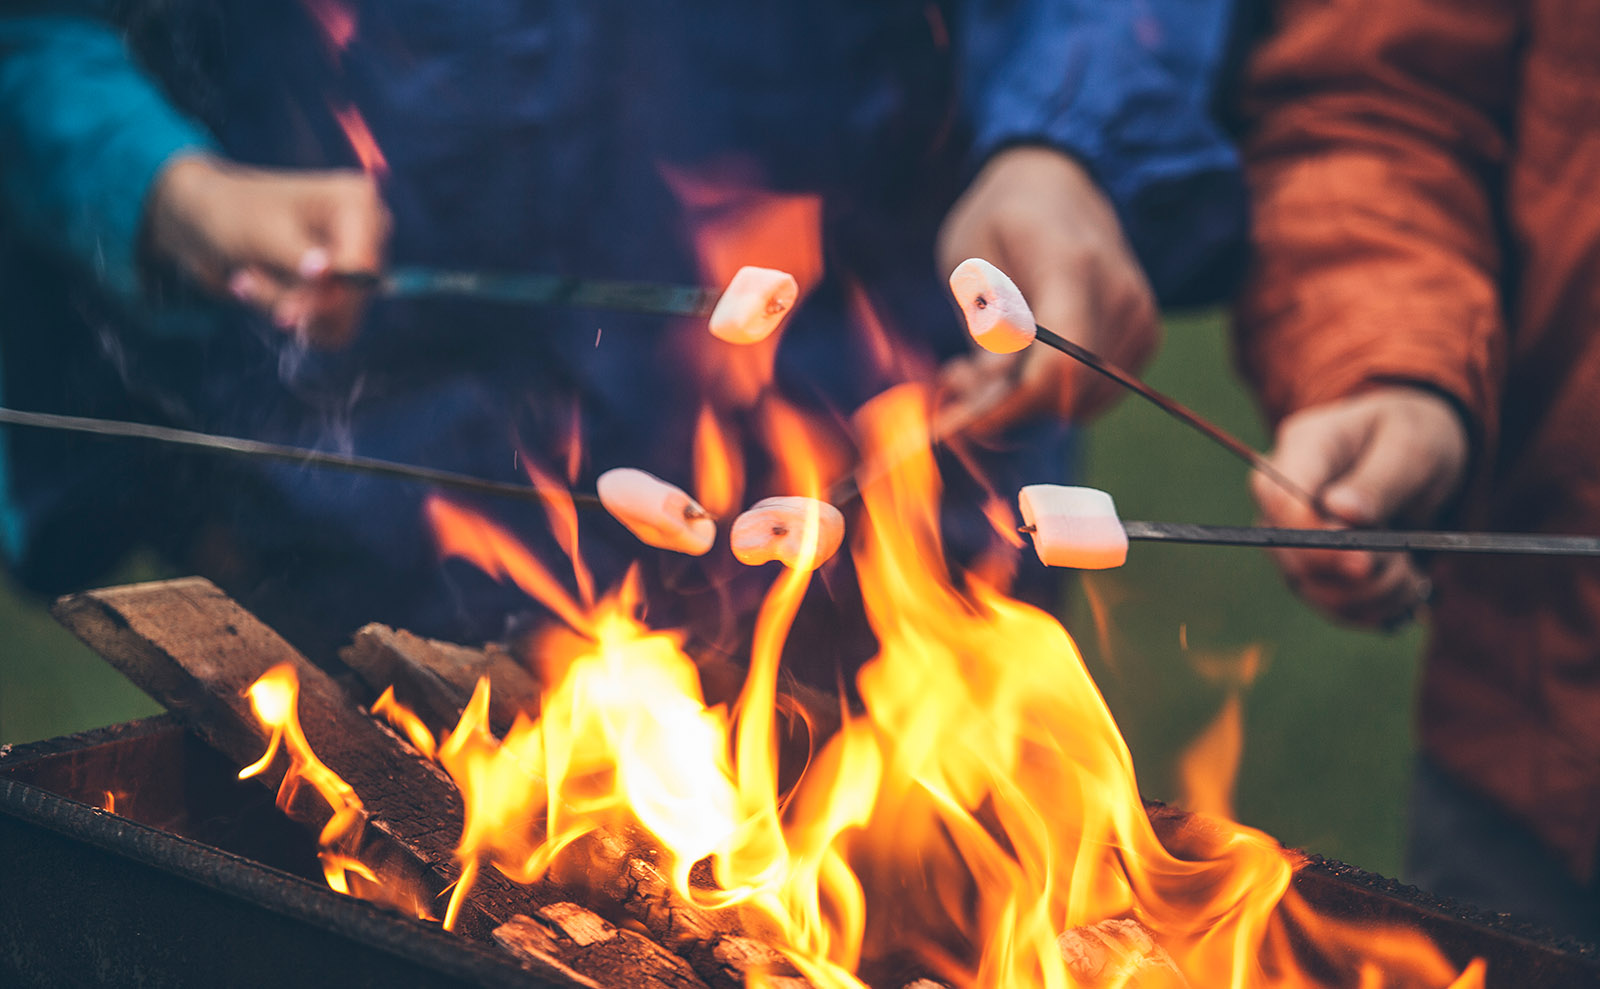 S'mores & Hot Dogs, Library Novels, Judy Blume, Olympic Torch & More: Endnotes 28 July